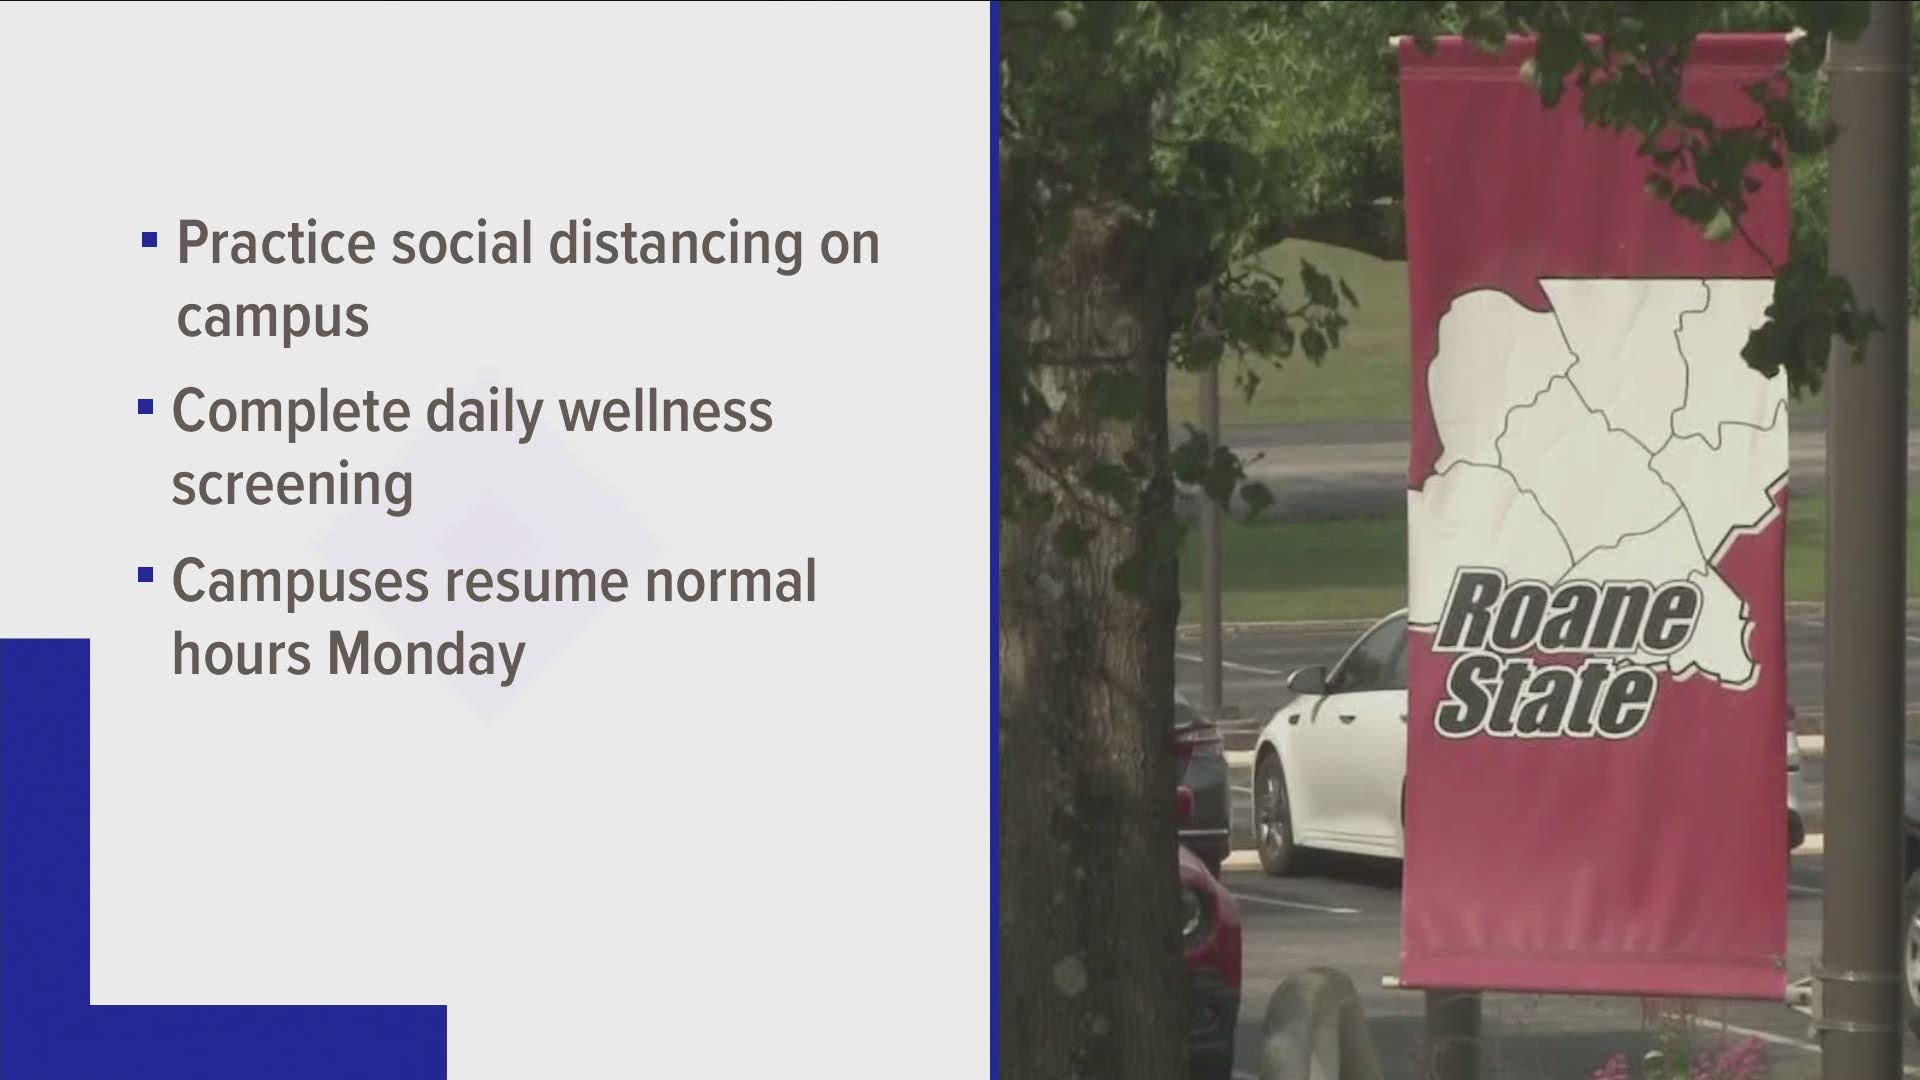 Roane State Community college release its reopening plan for the fall semester.